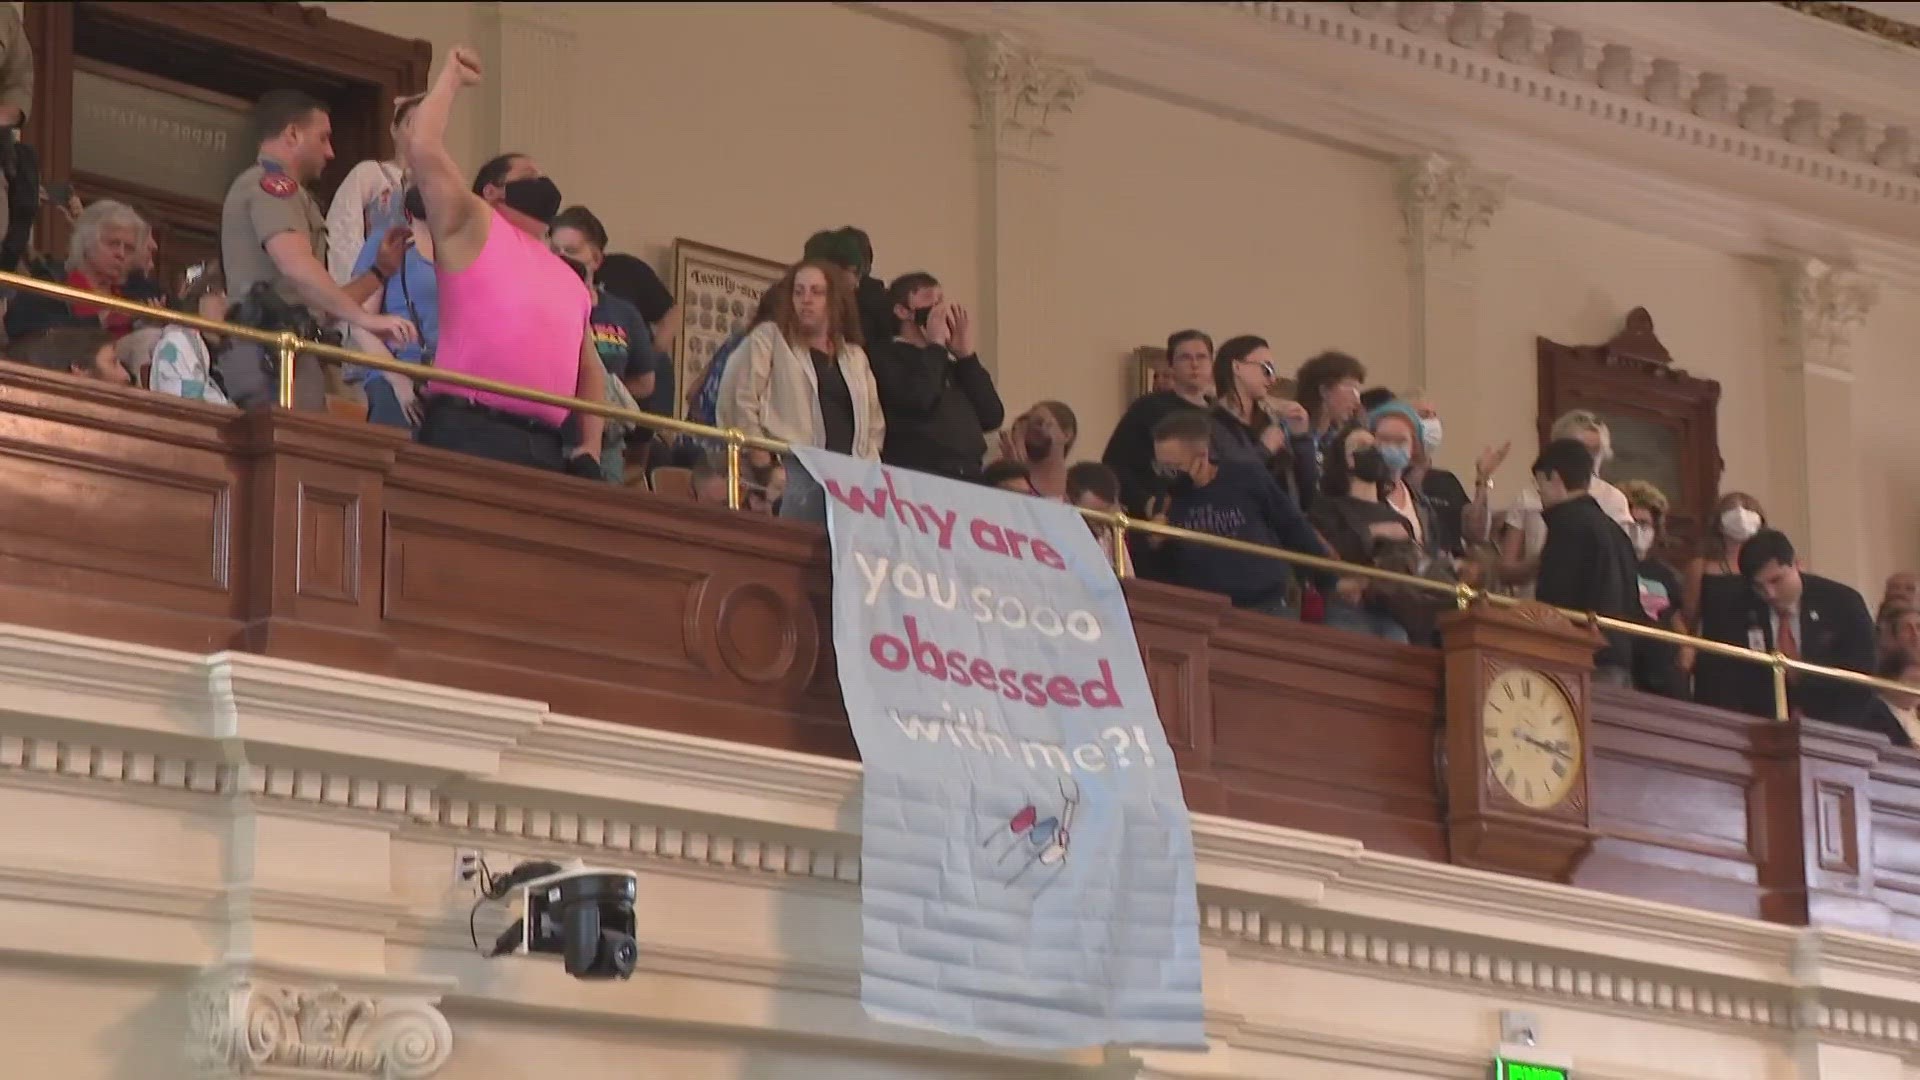 Emotions ran high at the Texas Capitol Tuesday as the House was set to vote on a bill banning gender-affirming care for minors.